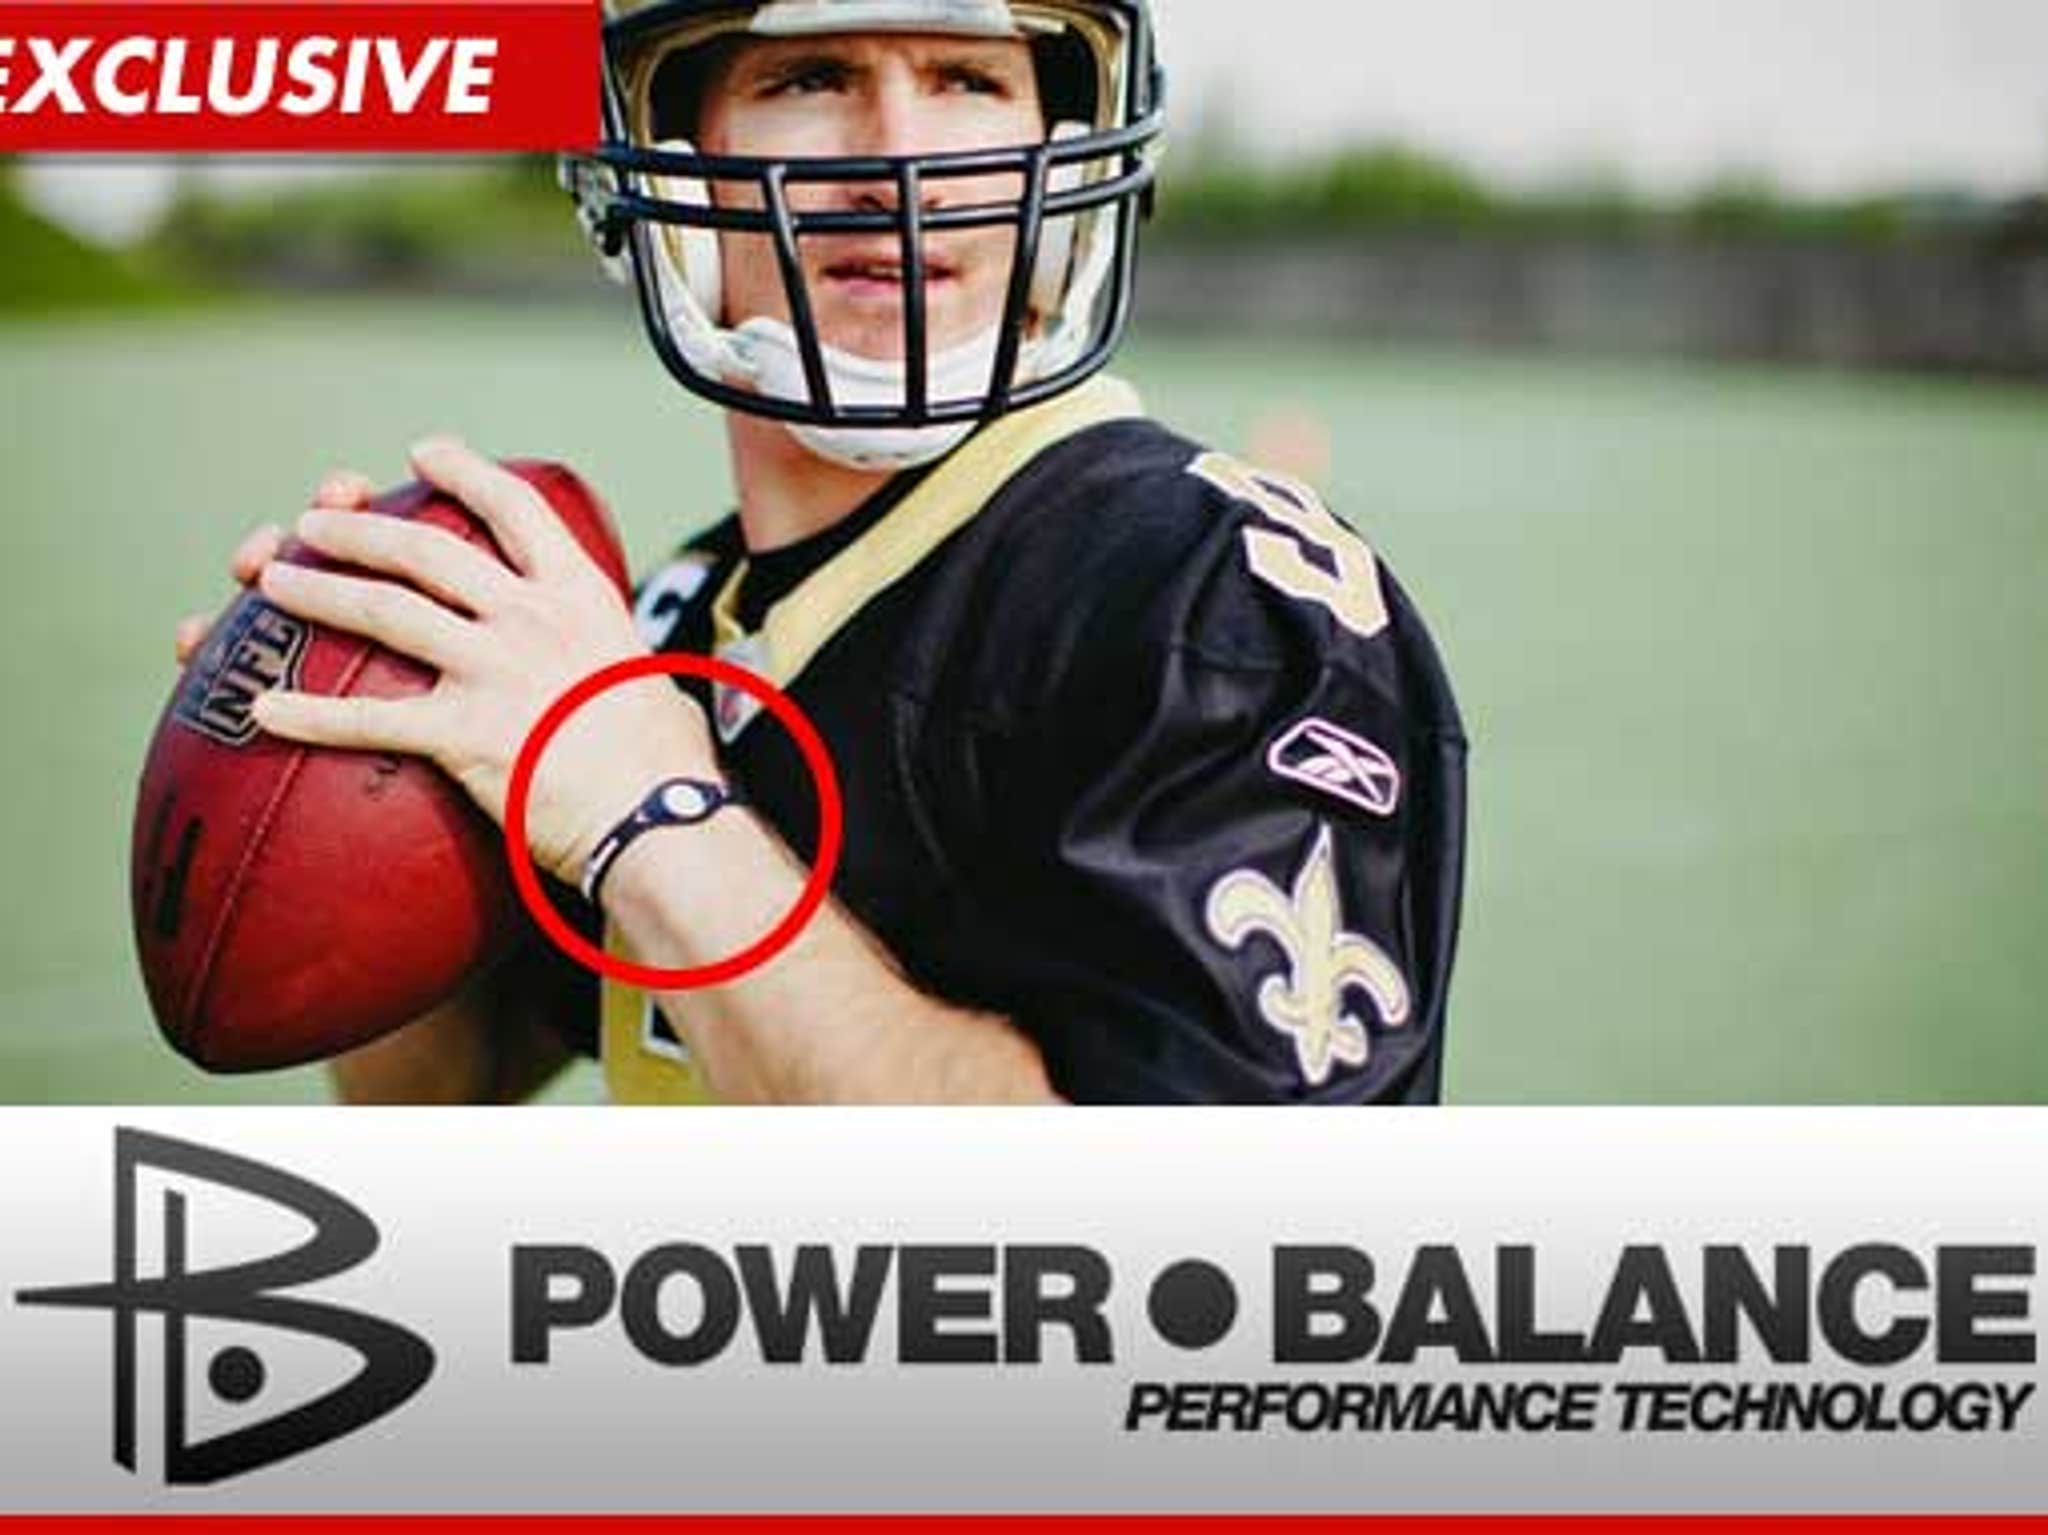 No science behind Power Balance wristbands